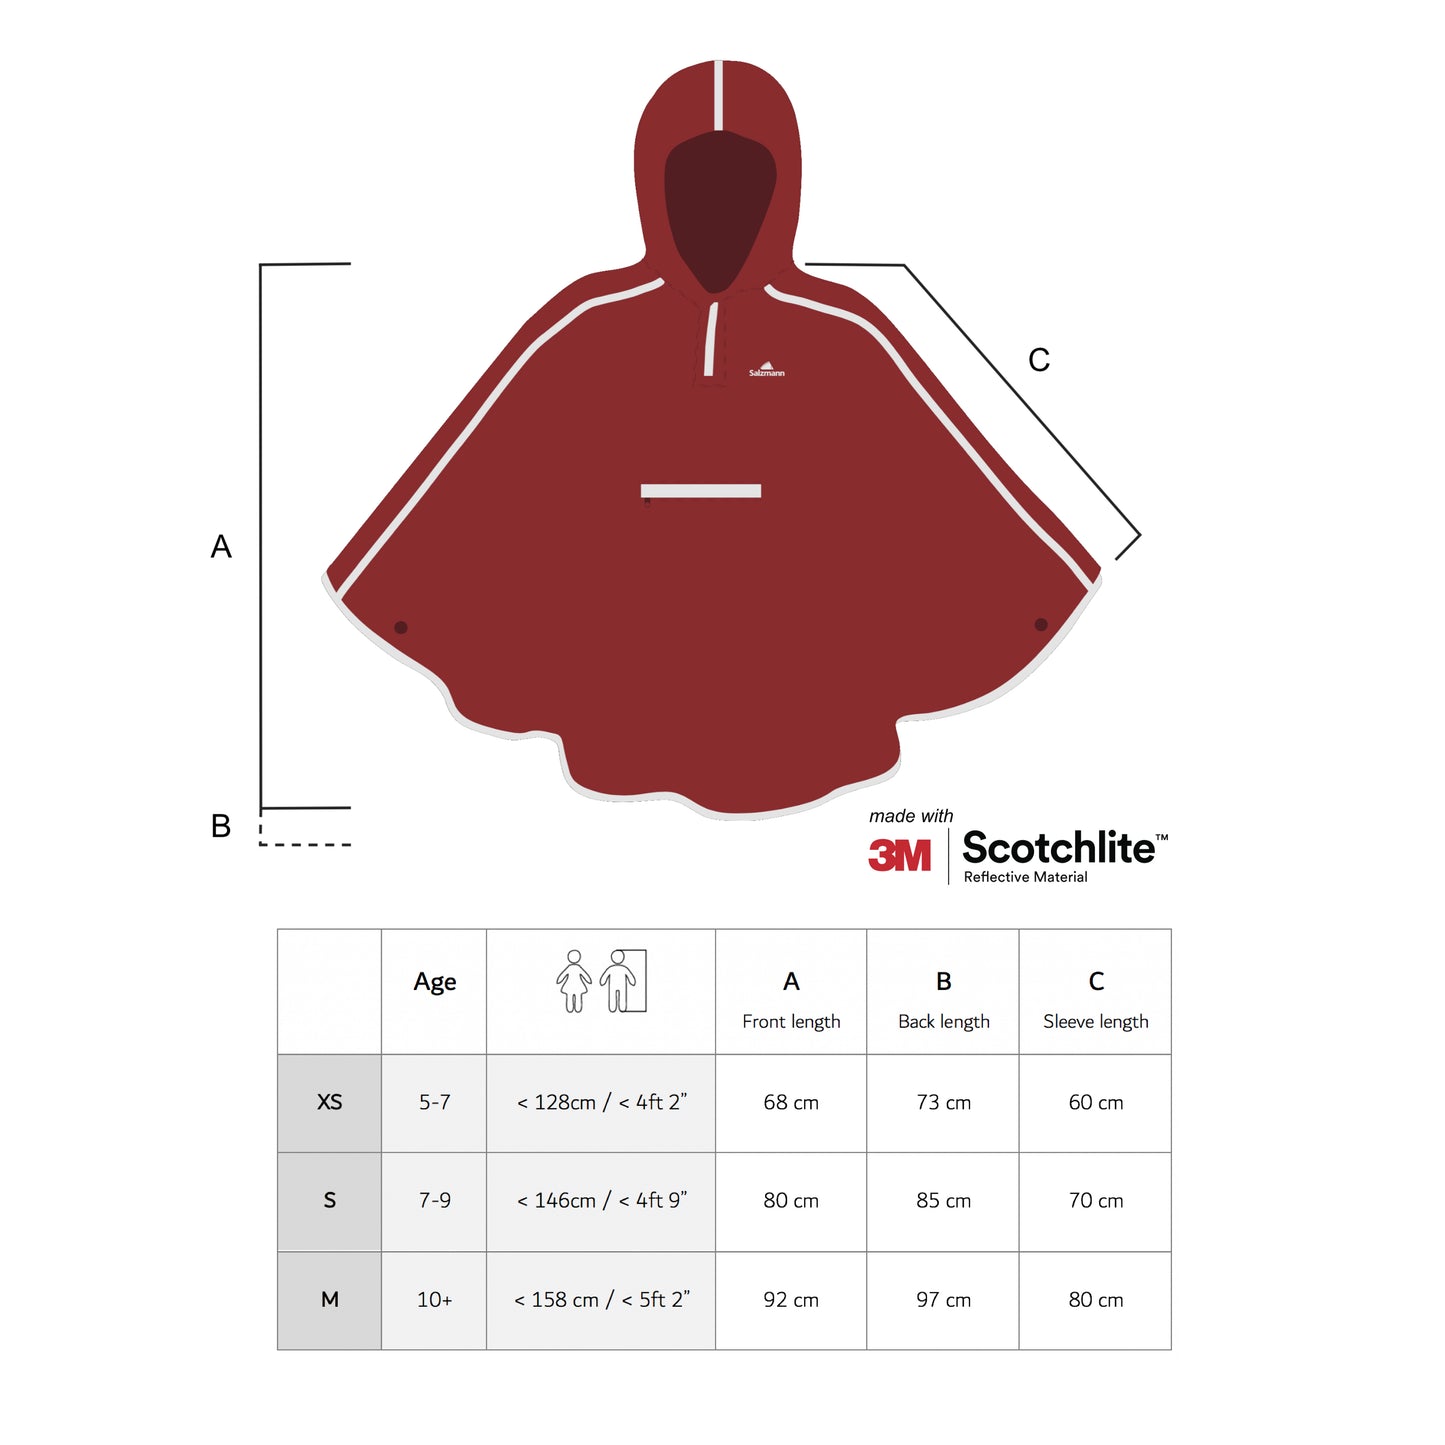 Size chart of the kids rain poncho showing the measurements for each size.